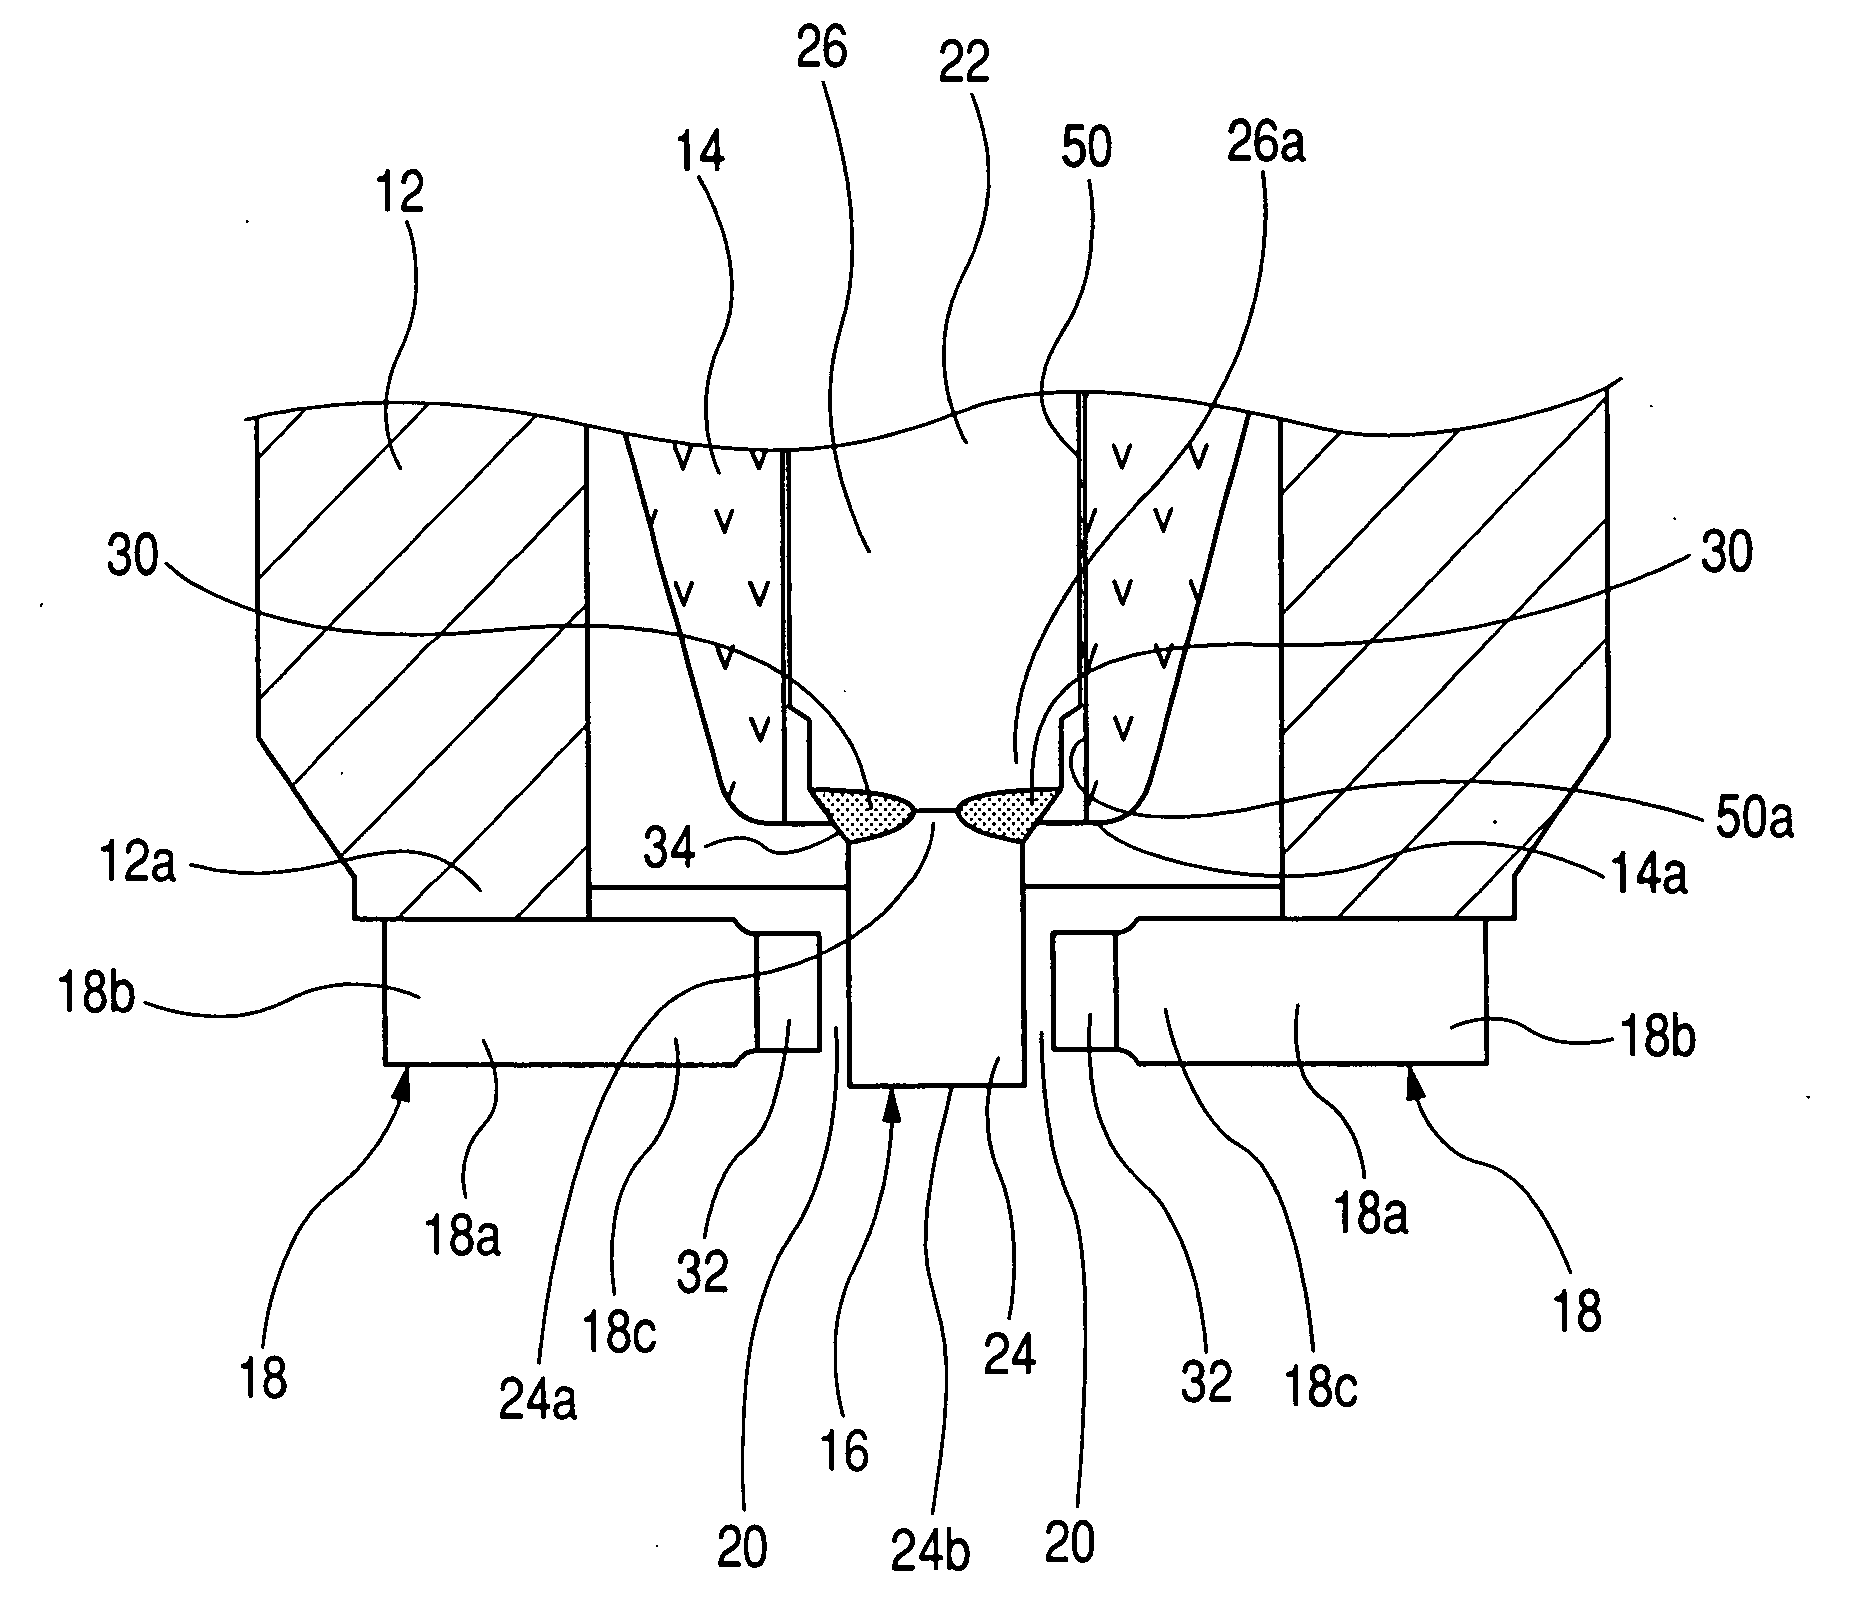 Spark plug for internal combustion engine and related manufacturing method